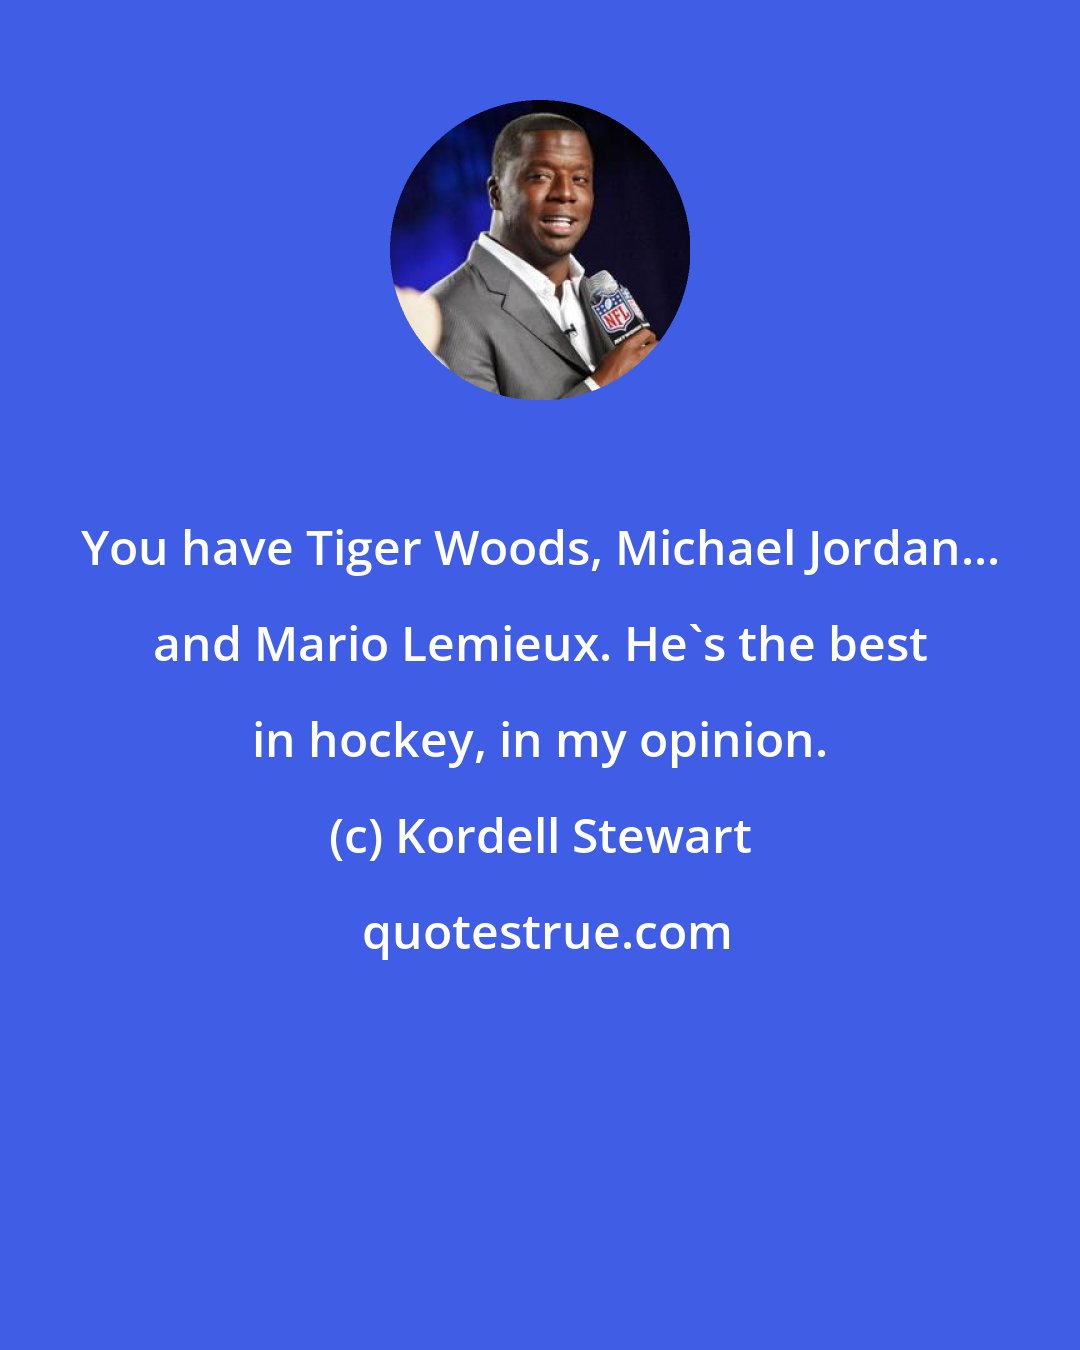 Kordell Stewart: You have Tiger Woods, Michael Jordan... and Mario Lemieux. He's the best in hockey, in my opinion.